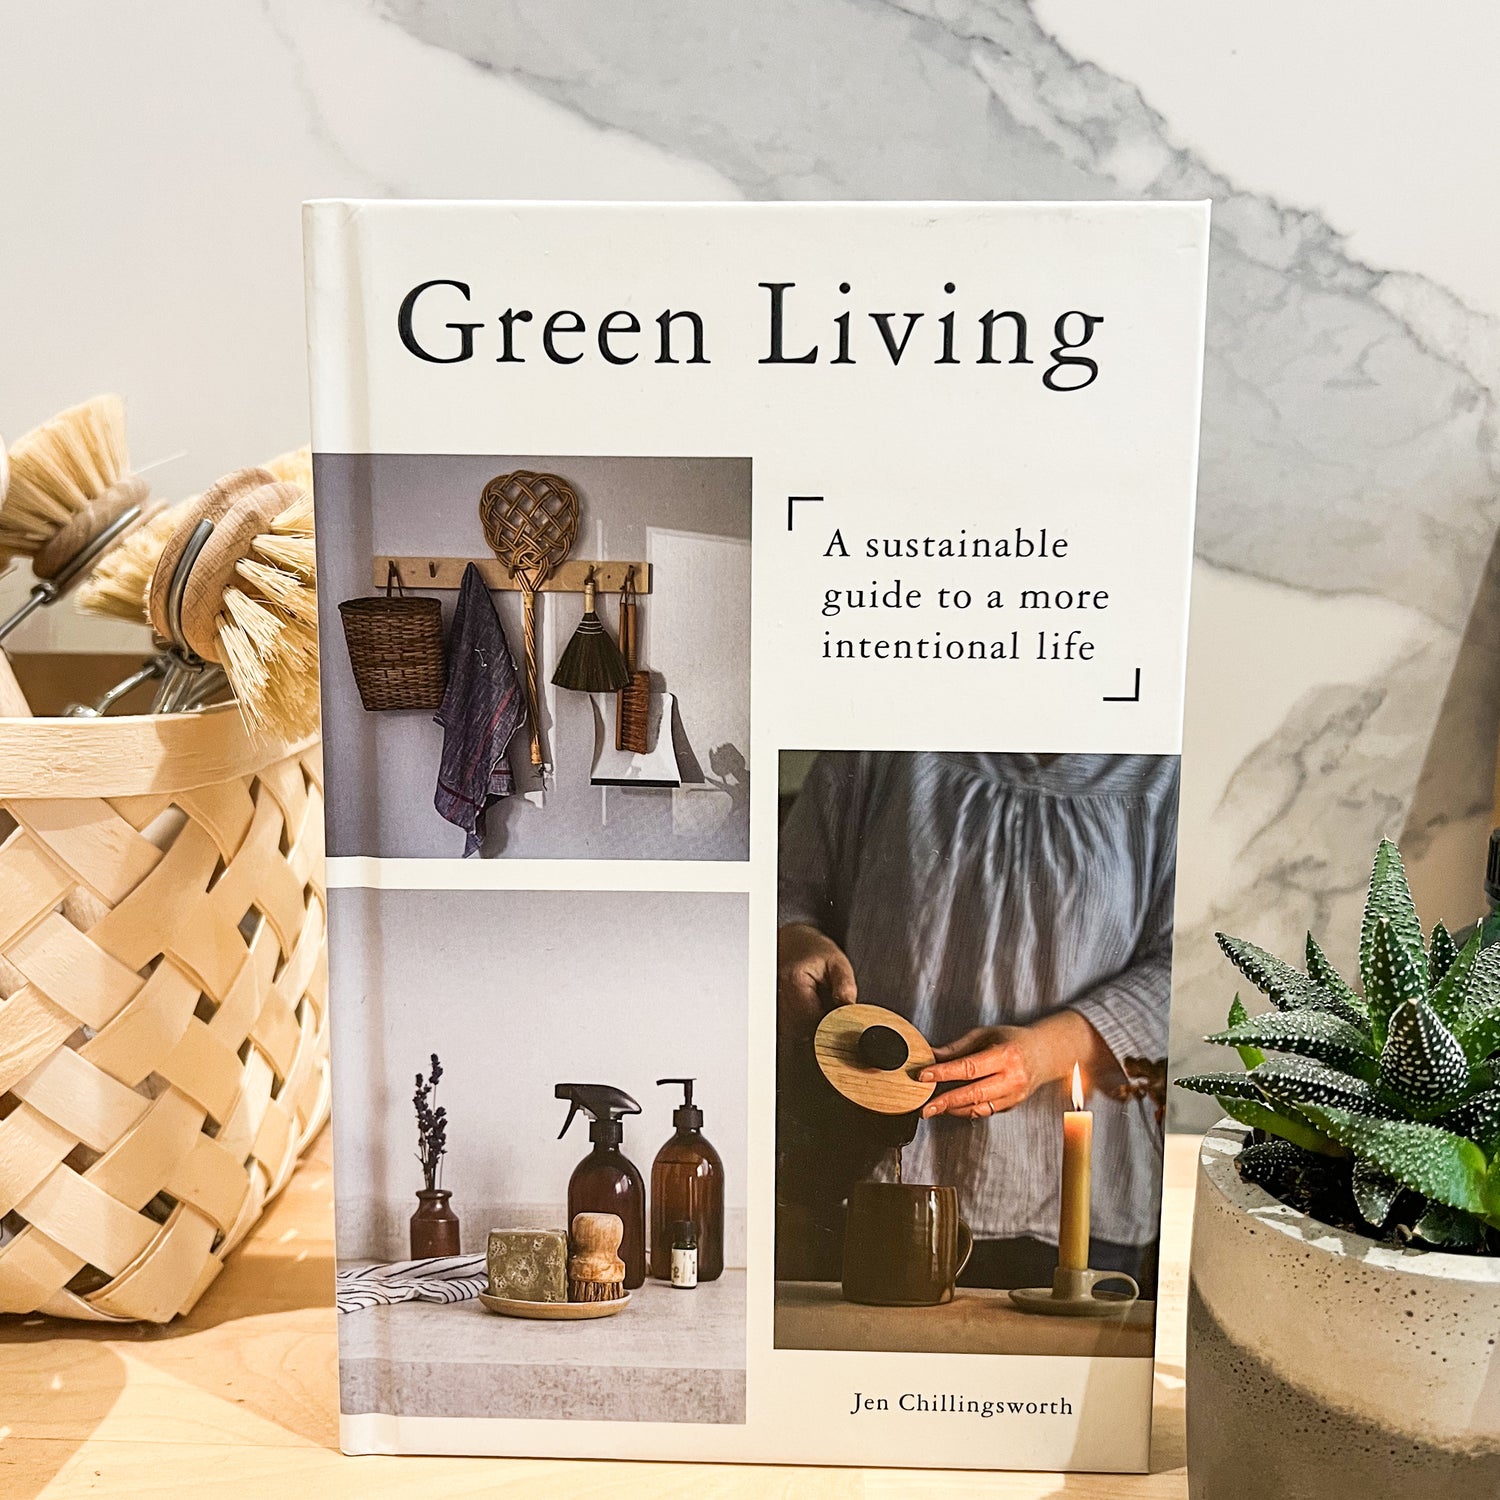 Green Living: A Sustainable Guide to a More Intentional Life (Hardback) By Jen Chillingsworth